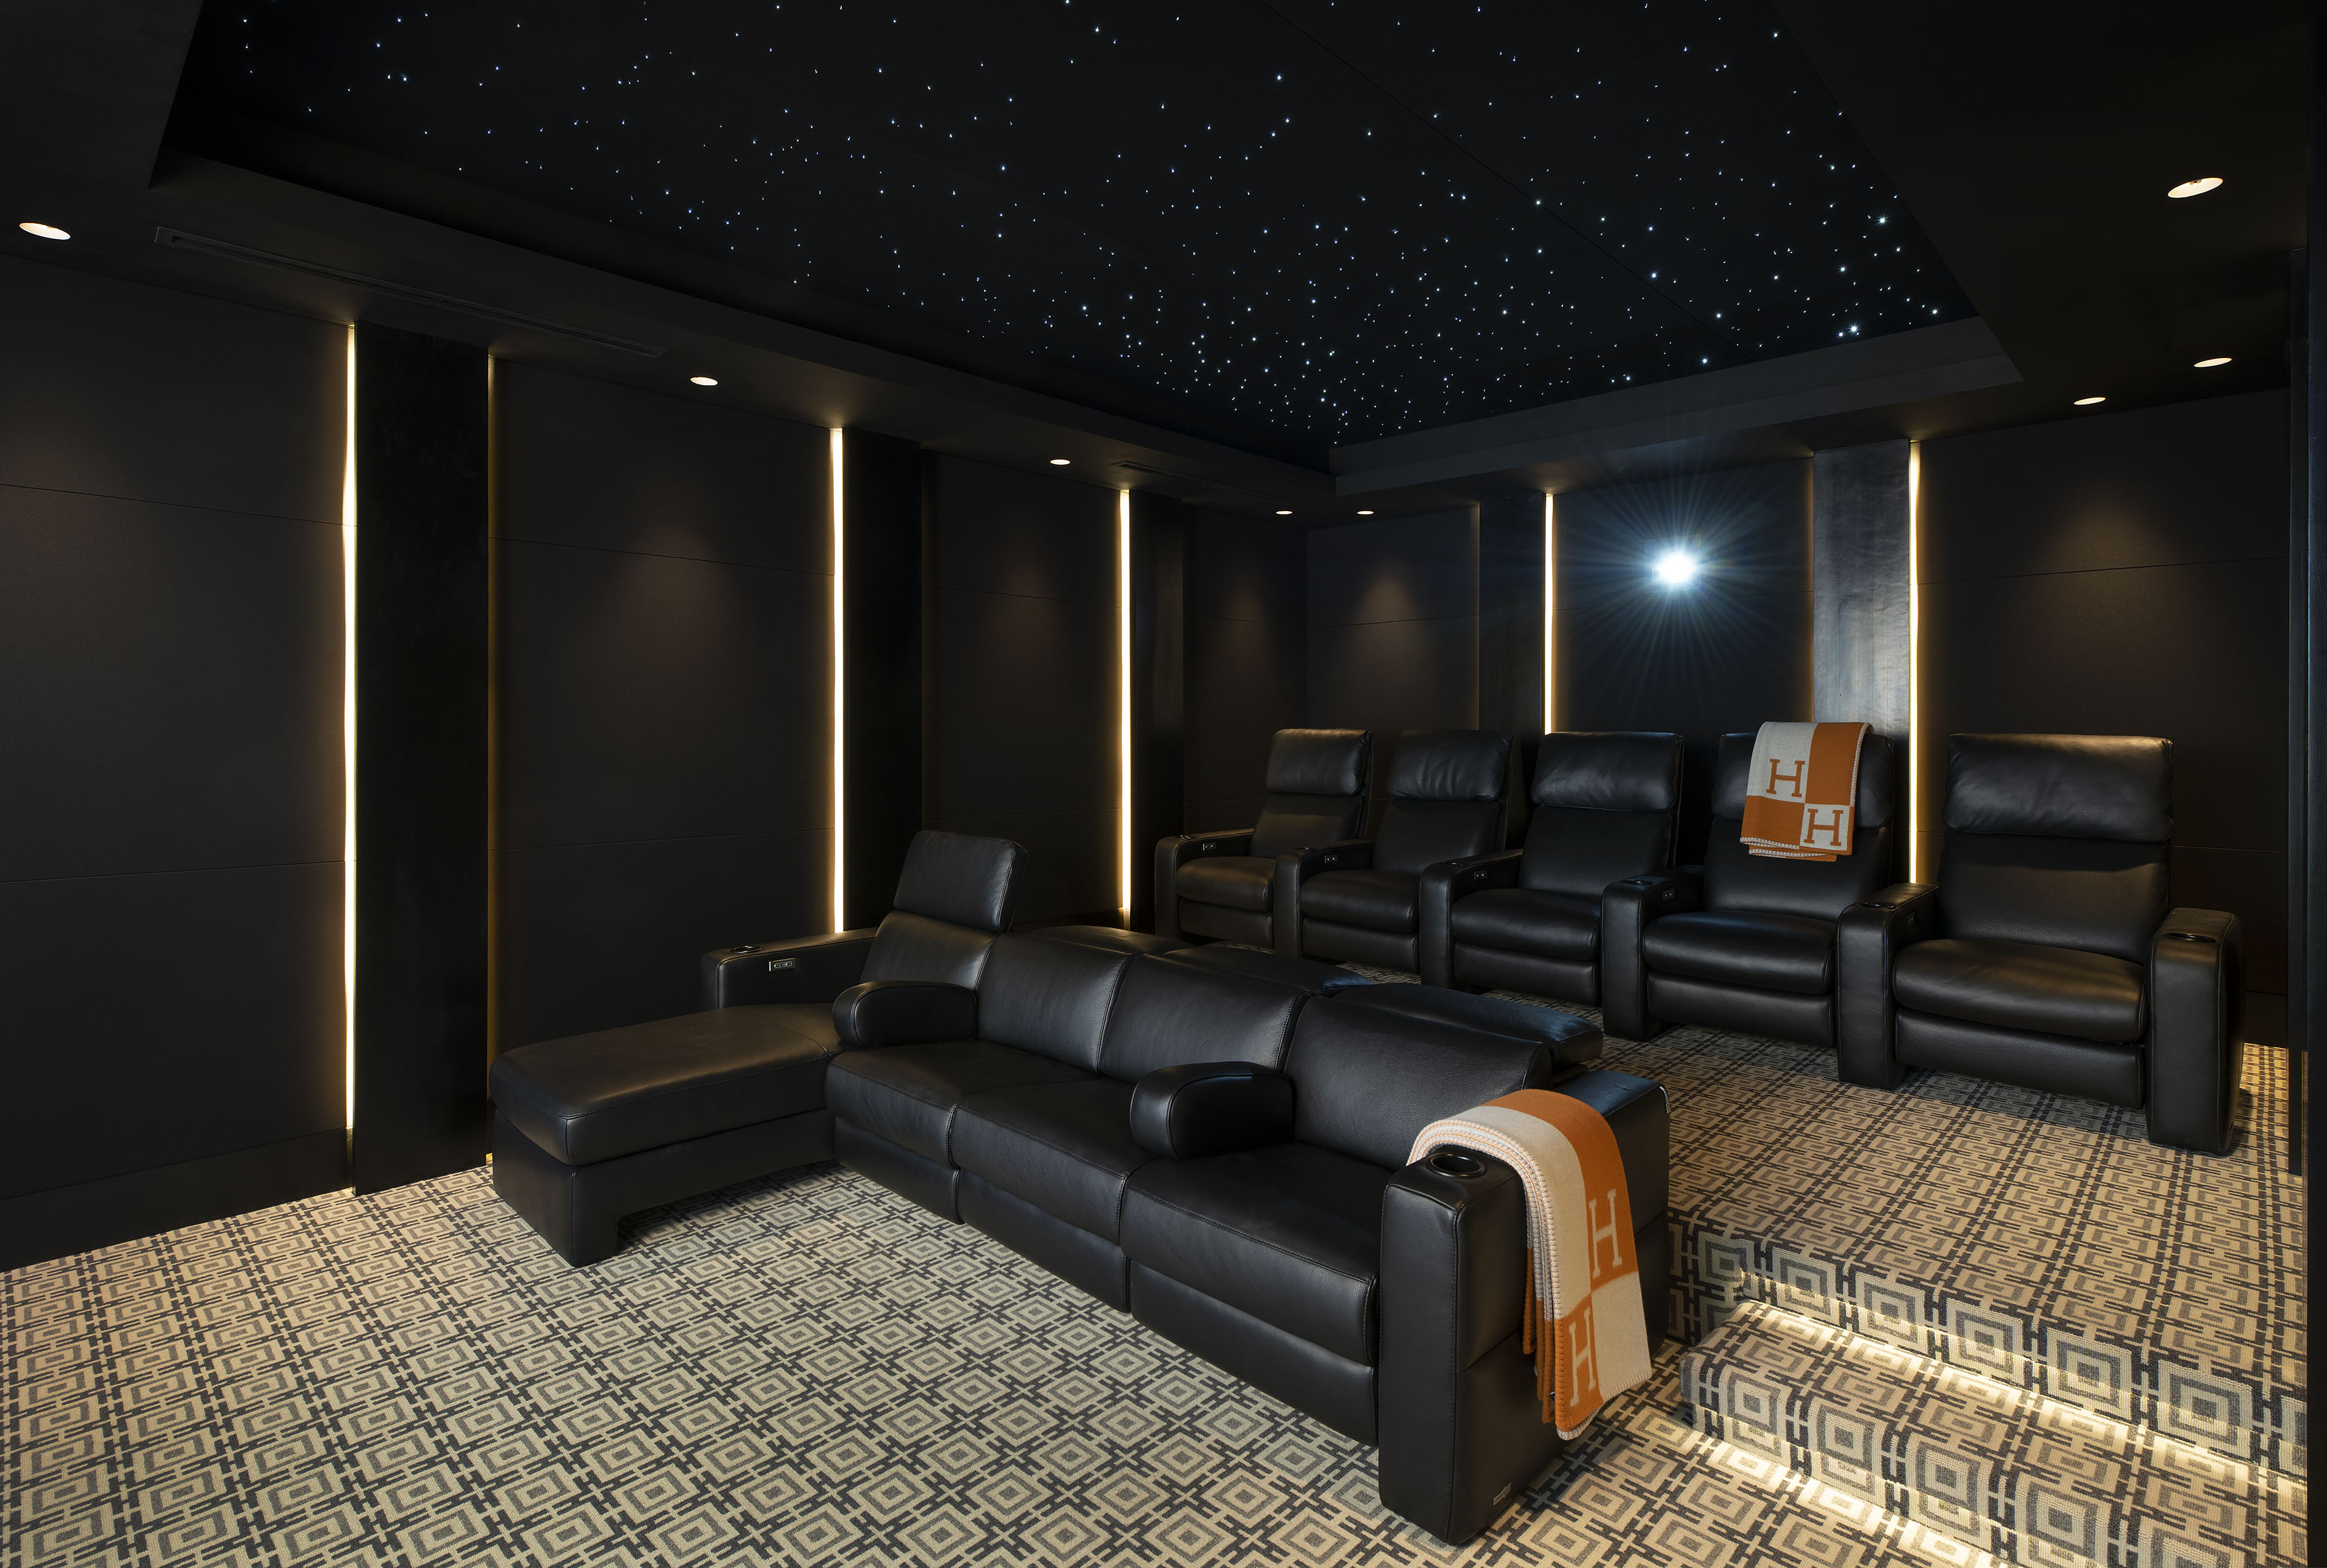 From Storage to Cinema: How an Attic Became an Extraordinary Home Screening Room